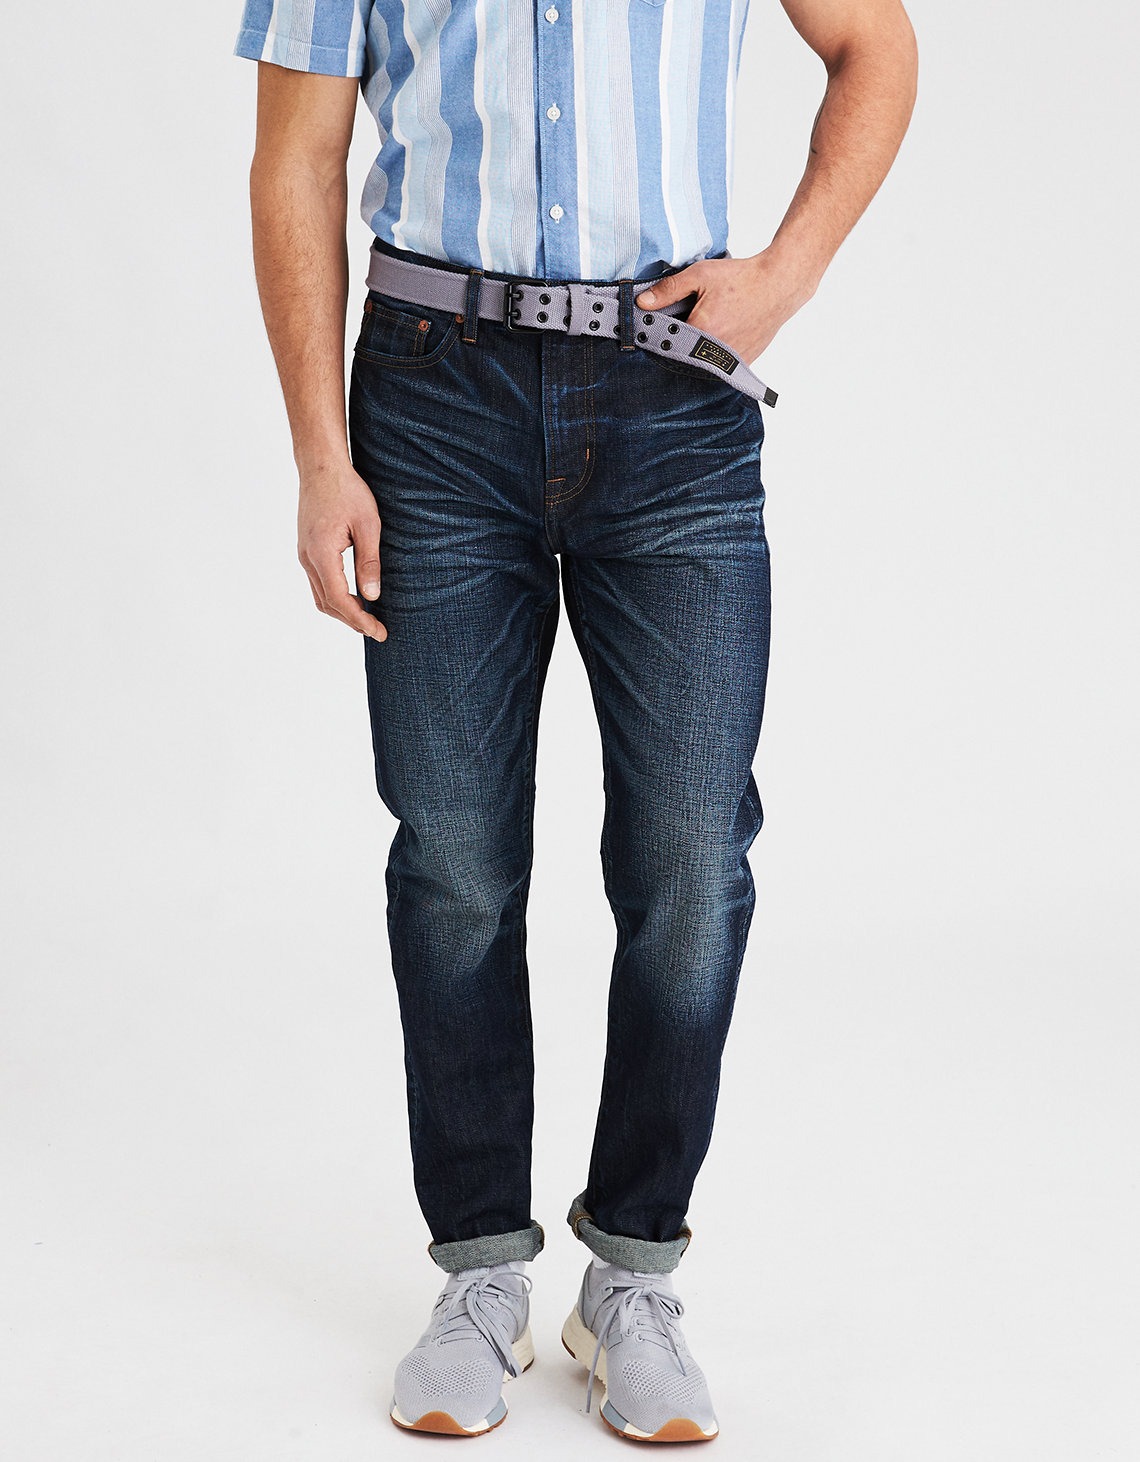 american eagle dad jeans